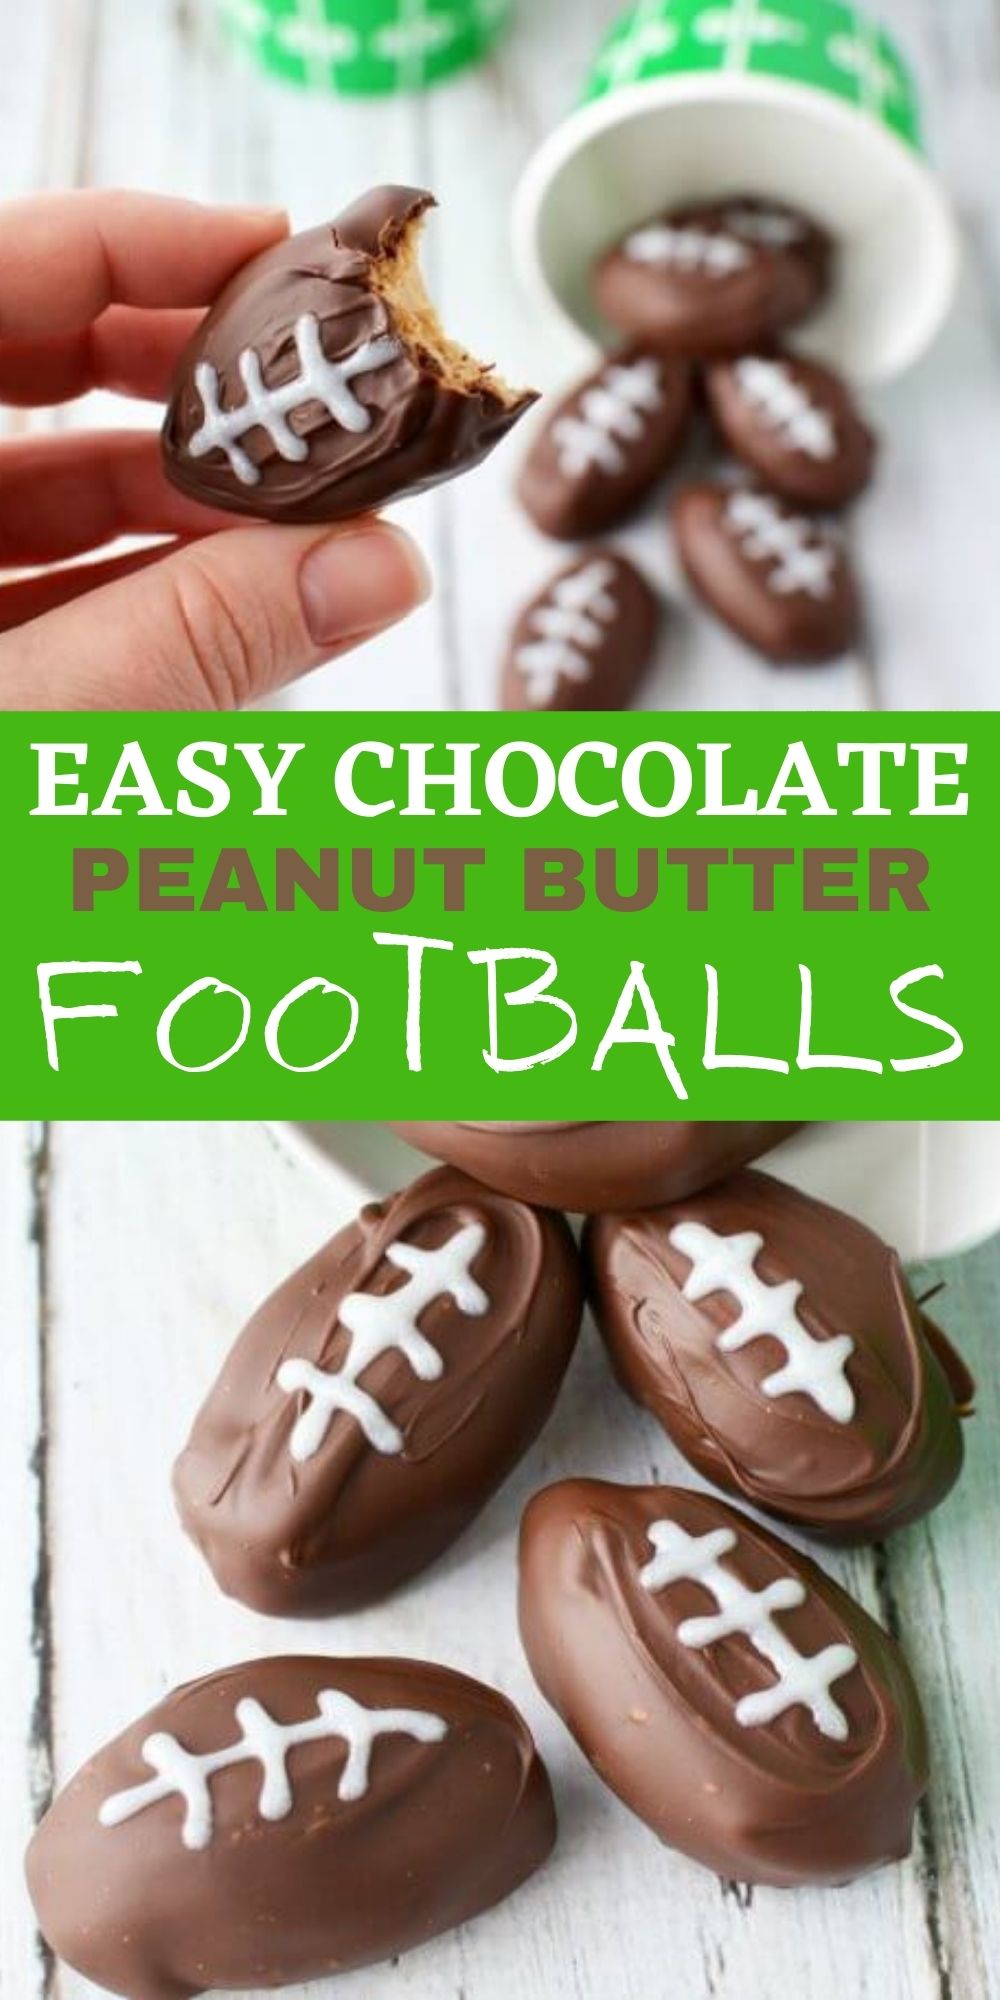 Enjoy these Football Shaped Chocolate Peanut Butter Balls that are perfect for the big game! Creamy, delicious and so easy to make! Everyone loves this chocolate peanut butter footballs that are easy to make and great for a party.  Try this easy no bake dessert for your next game day! #eatingonadime #dessertrecipes #chocolaterecipes #gamedayrecipes 
